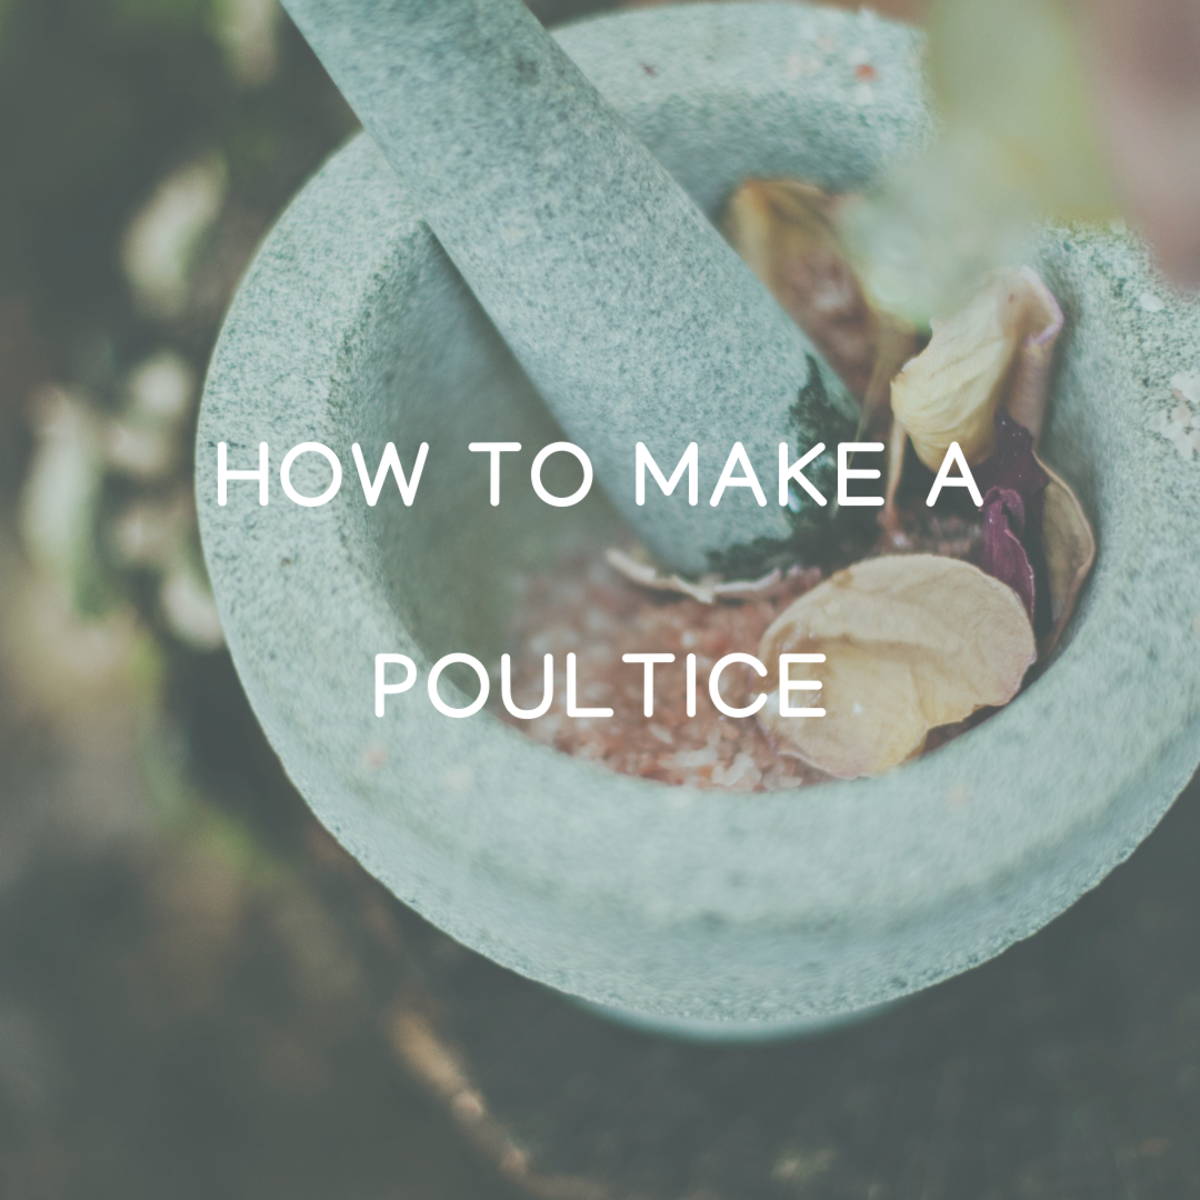 How to Make a Poultice for Removing Splinters, Boils and Abscesses